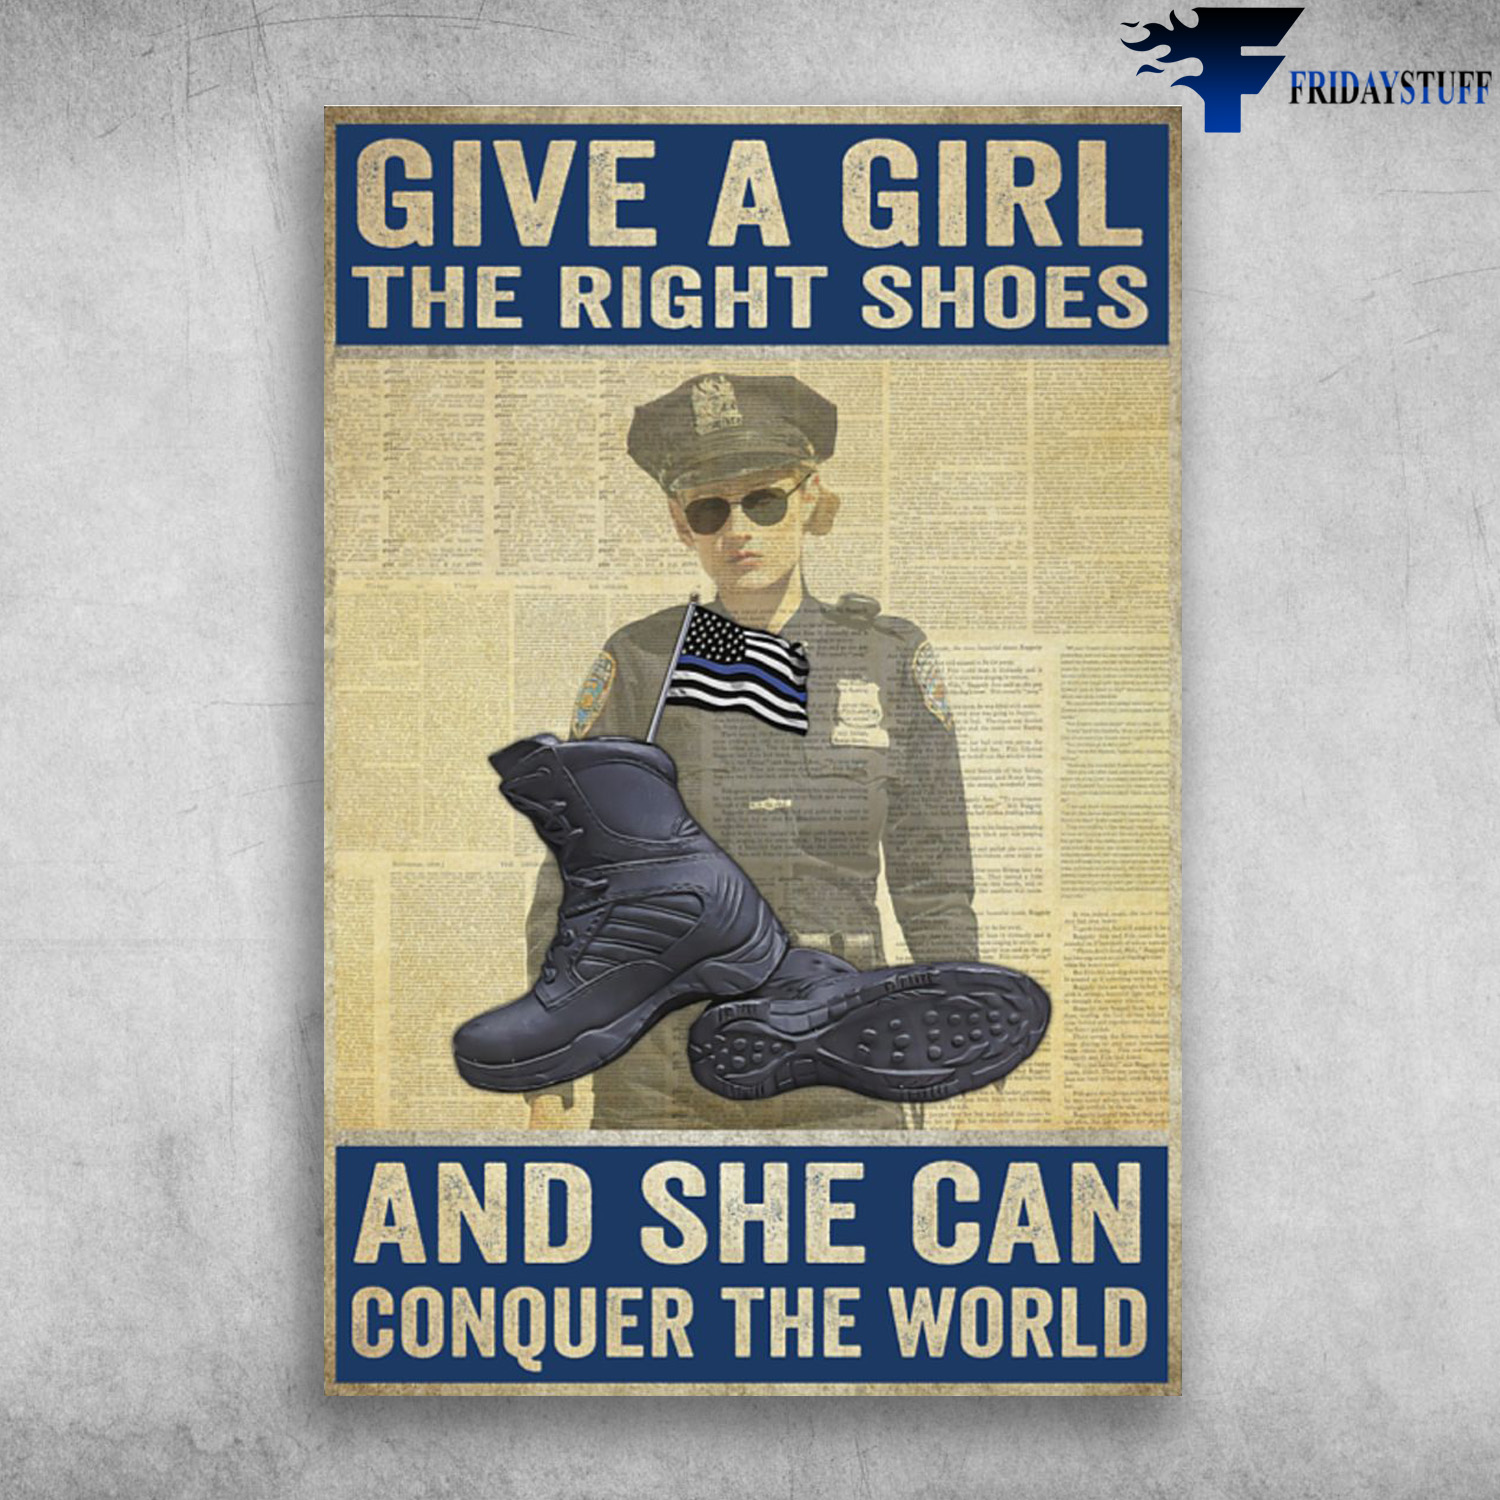 American Police Shoes - Give A Girl The Right Shoes, And She Can Conquer The World